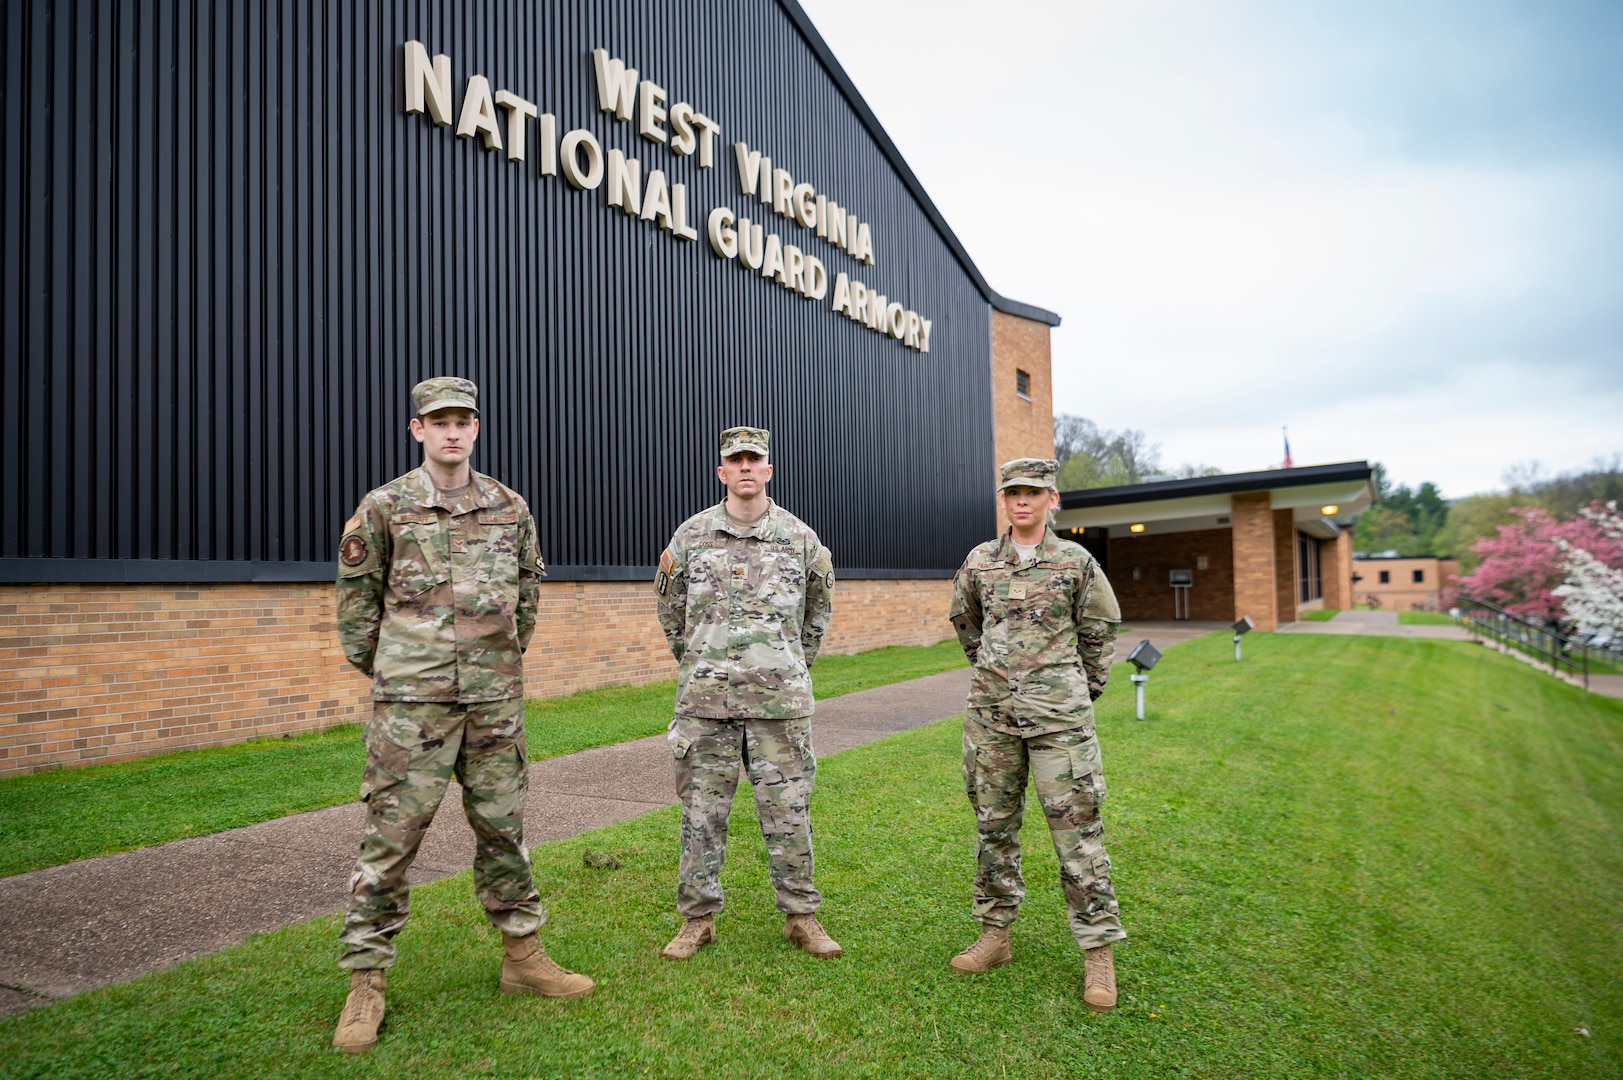 Senior Airman Will Wagstaff (left), Maj. Ryan Coss (center) and Senior Airman Carly Farmer pose for a photo outside the West Virginia National Guard Joint Forces Headquarters in Charleston, W.Va. Coss, Wagstaff and Farmer are serving as a part of Task Force Petersen, the task force dedicated to procuring and forecasting demand for critical personal protective equipment for the State of West Virginia's response to the ongoing COVID-19 pandemic. (U.S. Air National Guard photo by Staff Sgt. Caleb Vance.)